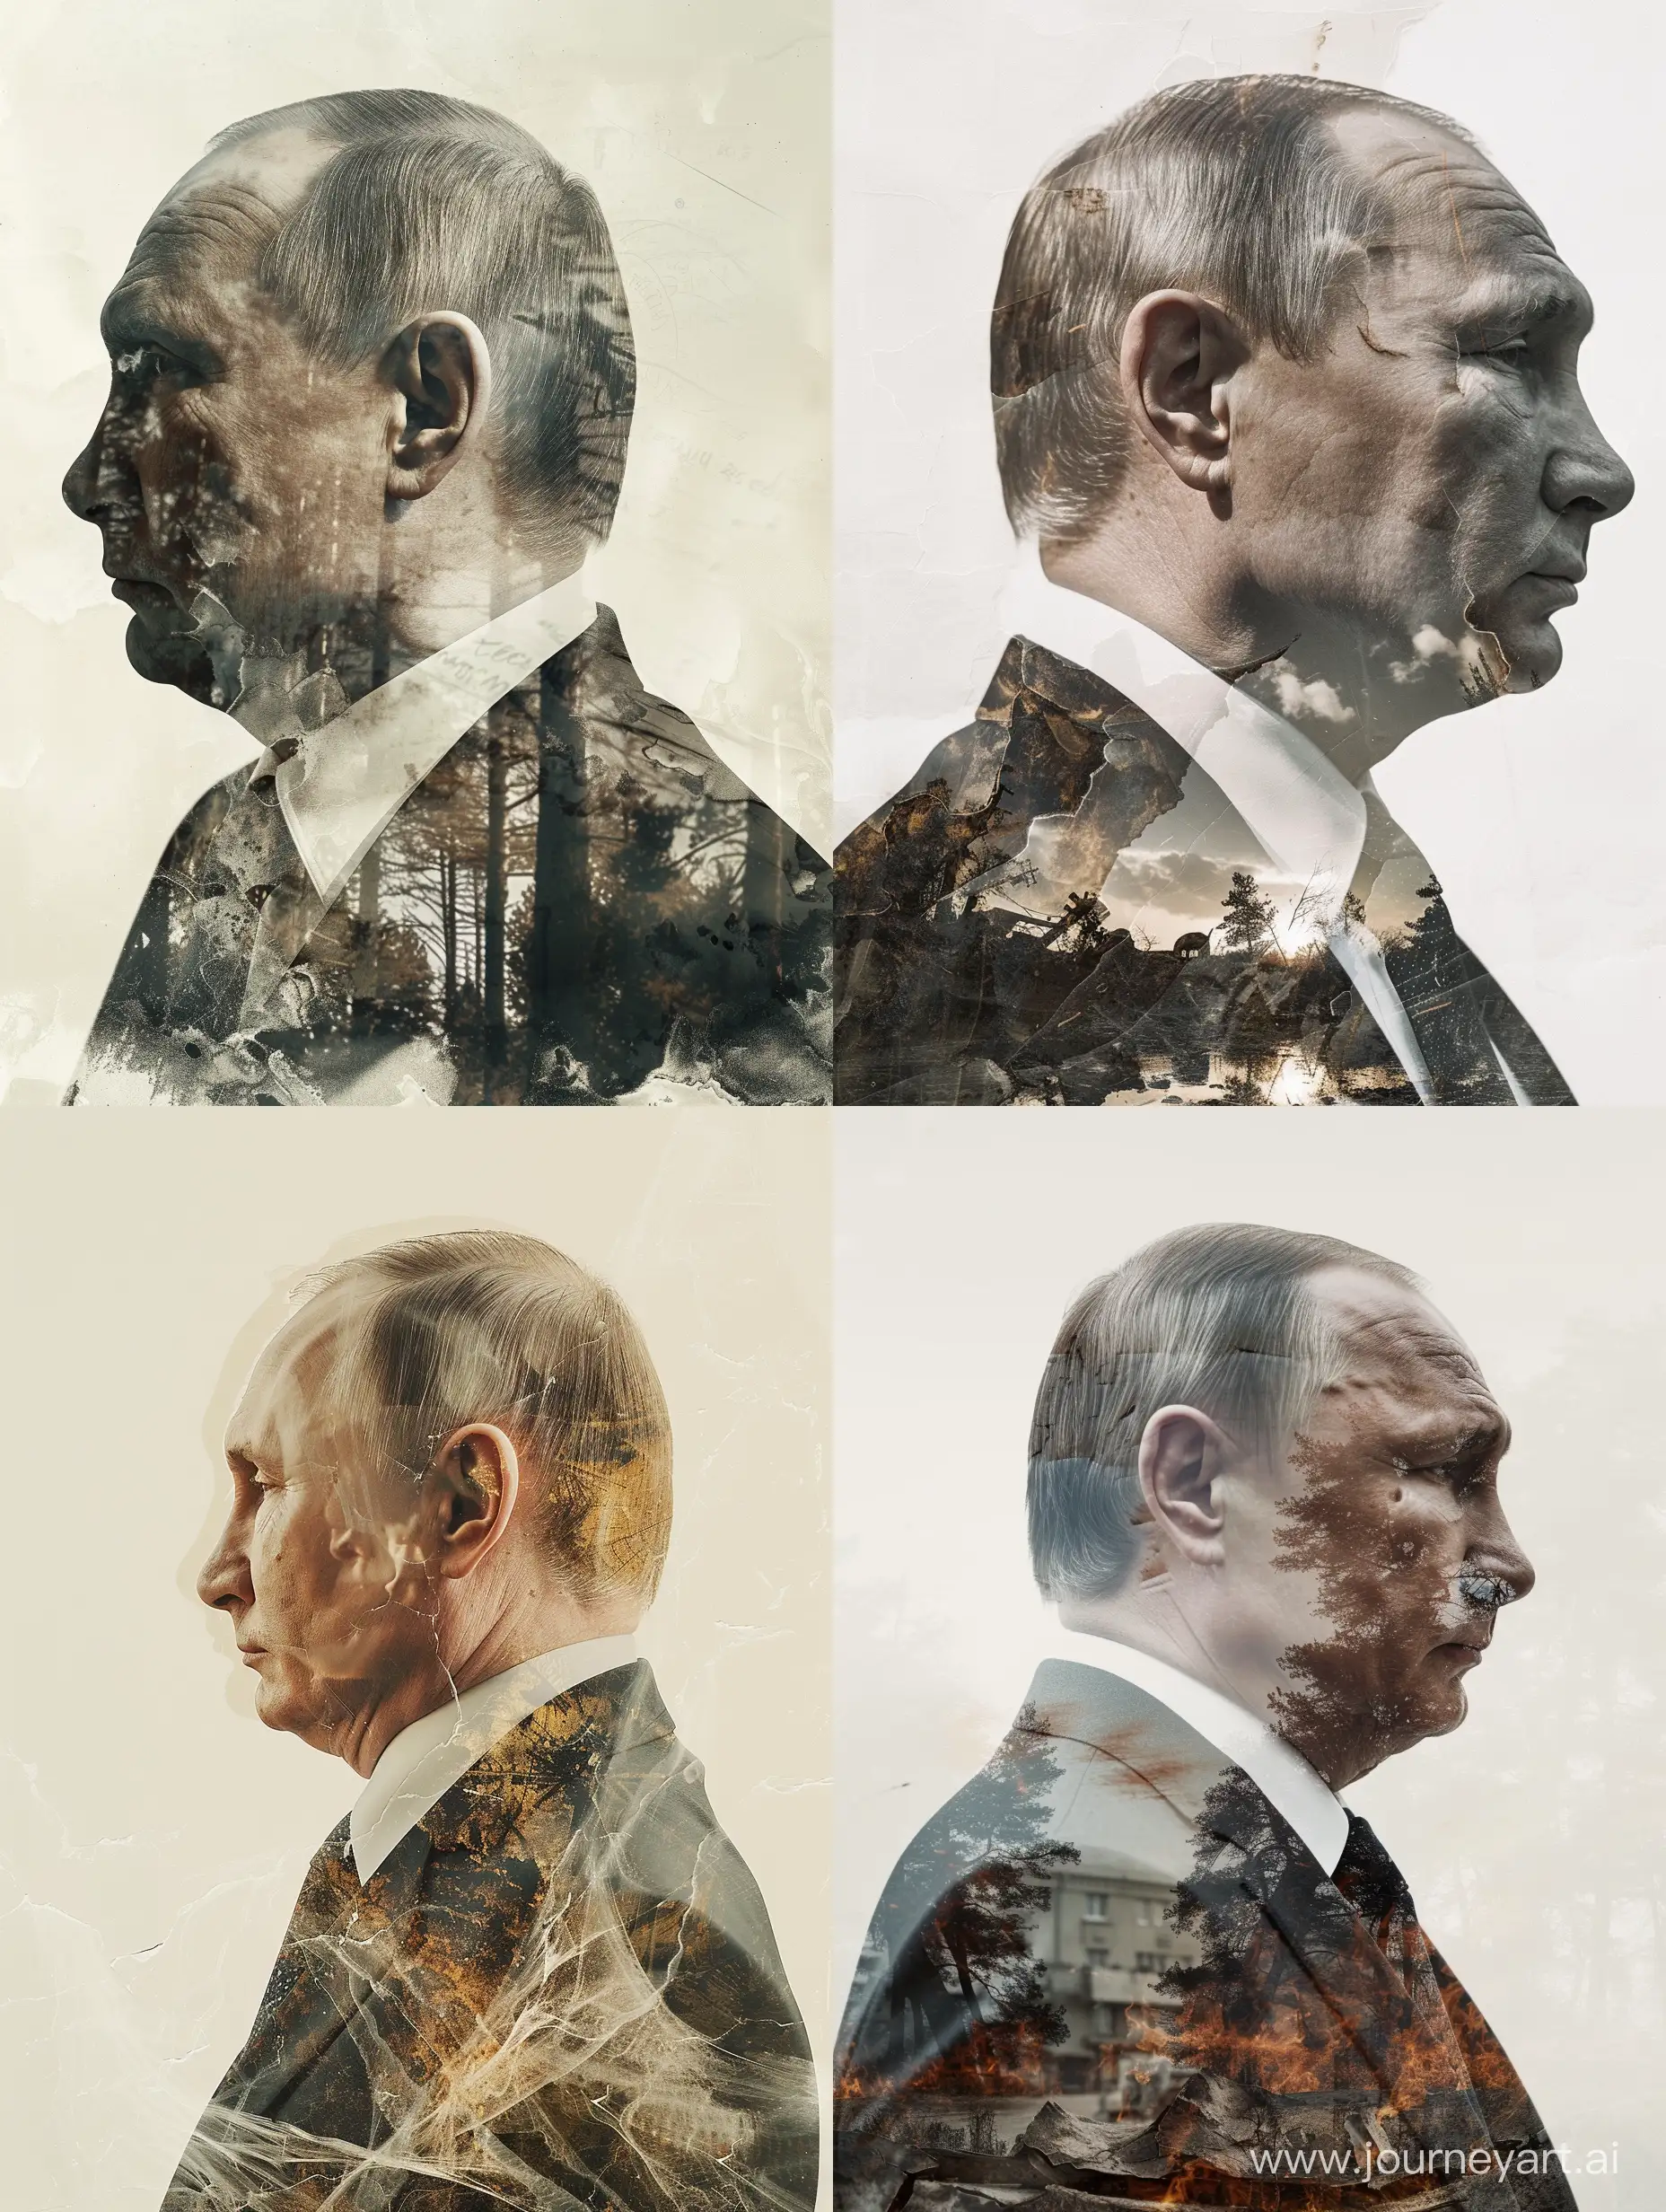 Vladimir Putin in double exposure of dystopian war world, sketching paper, in the style of mixed media installations, translucent layers, raw materialism, deconstructed tailoring, burned/charred, 